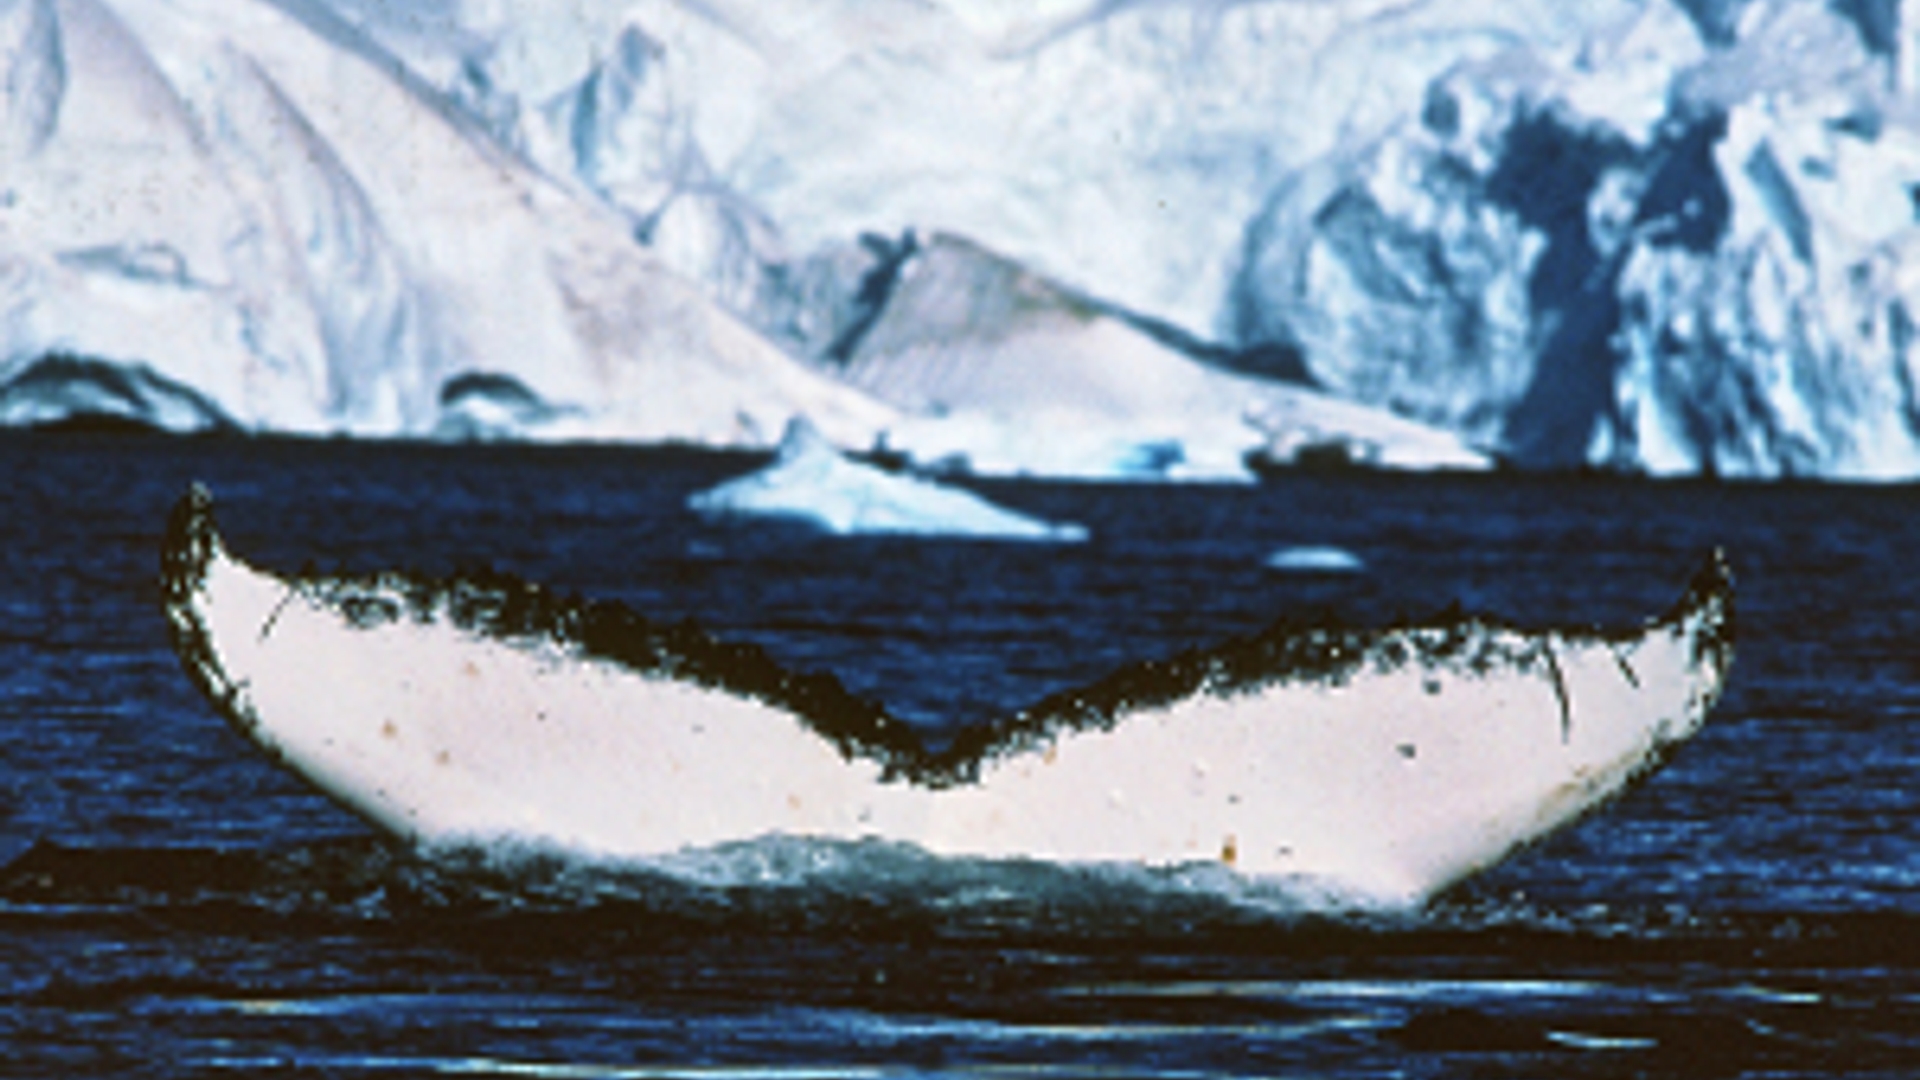 Flickr_walvis_Antartic_and_Southern_Ocean_Coalition_300.jpg